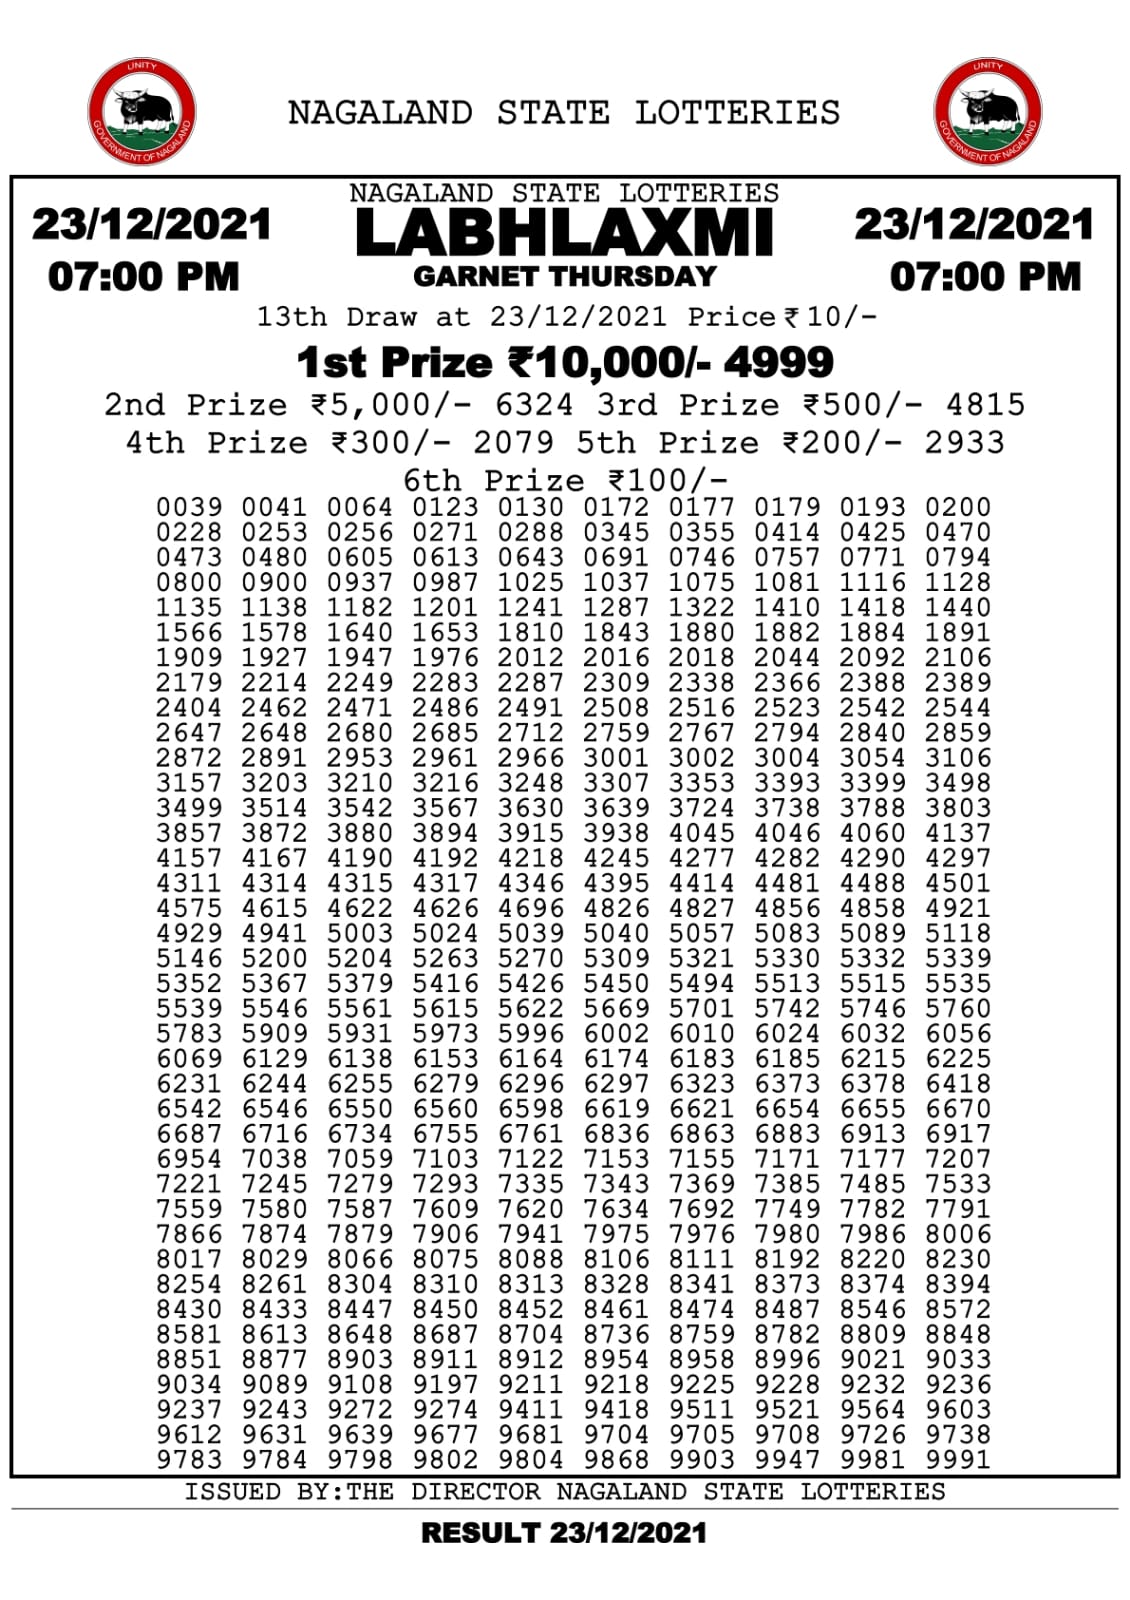 Labhlaxmi 7.00pm Lottery Result 23.12.2021